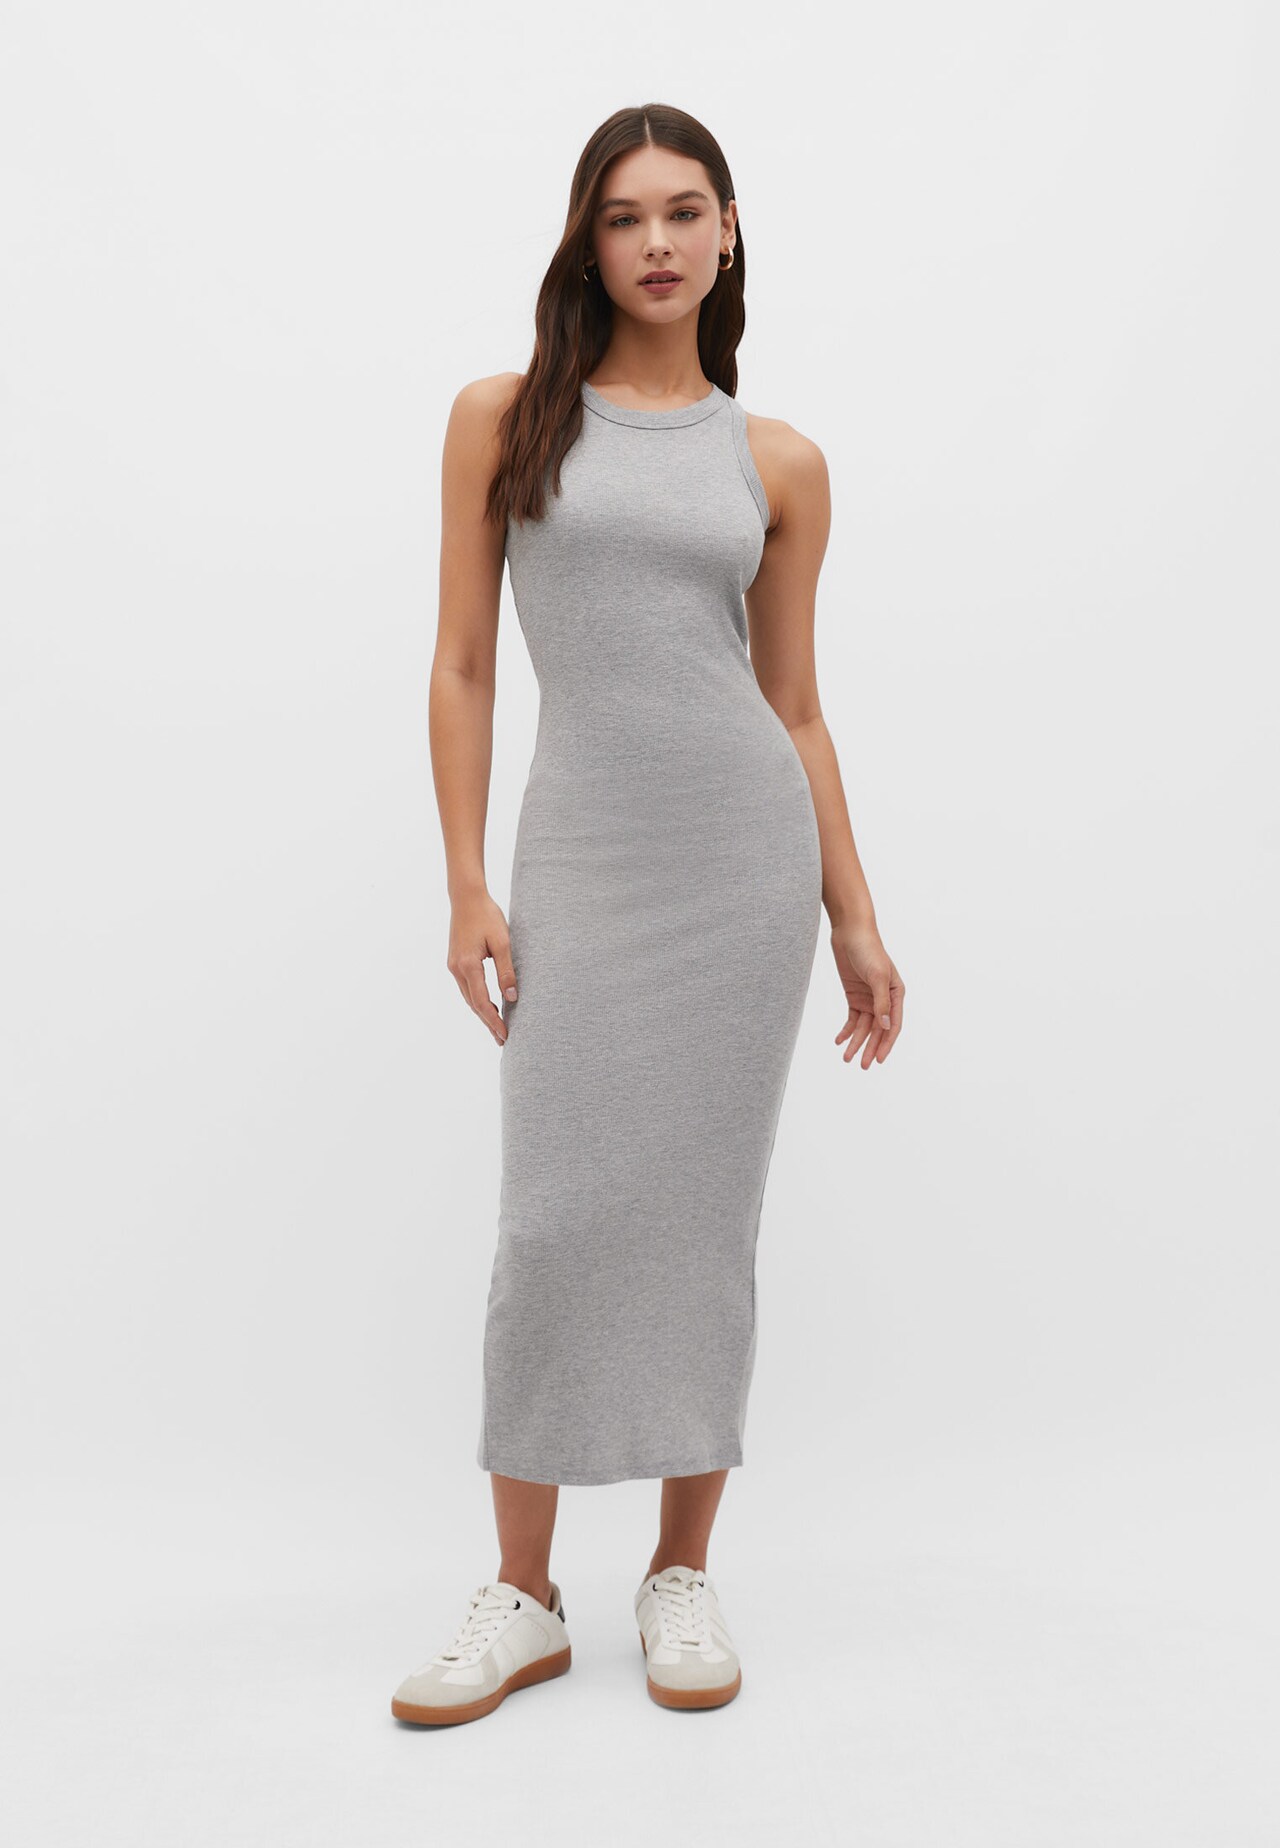 Fitted ribbed midi dress - Women's fashion